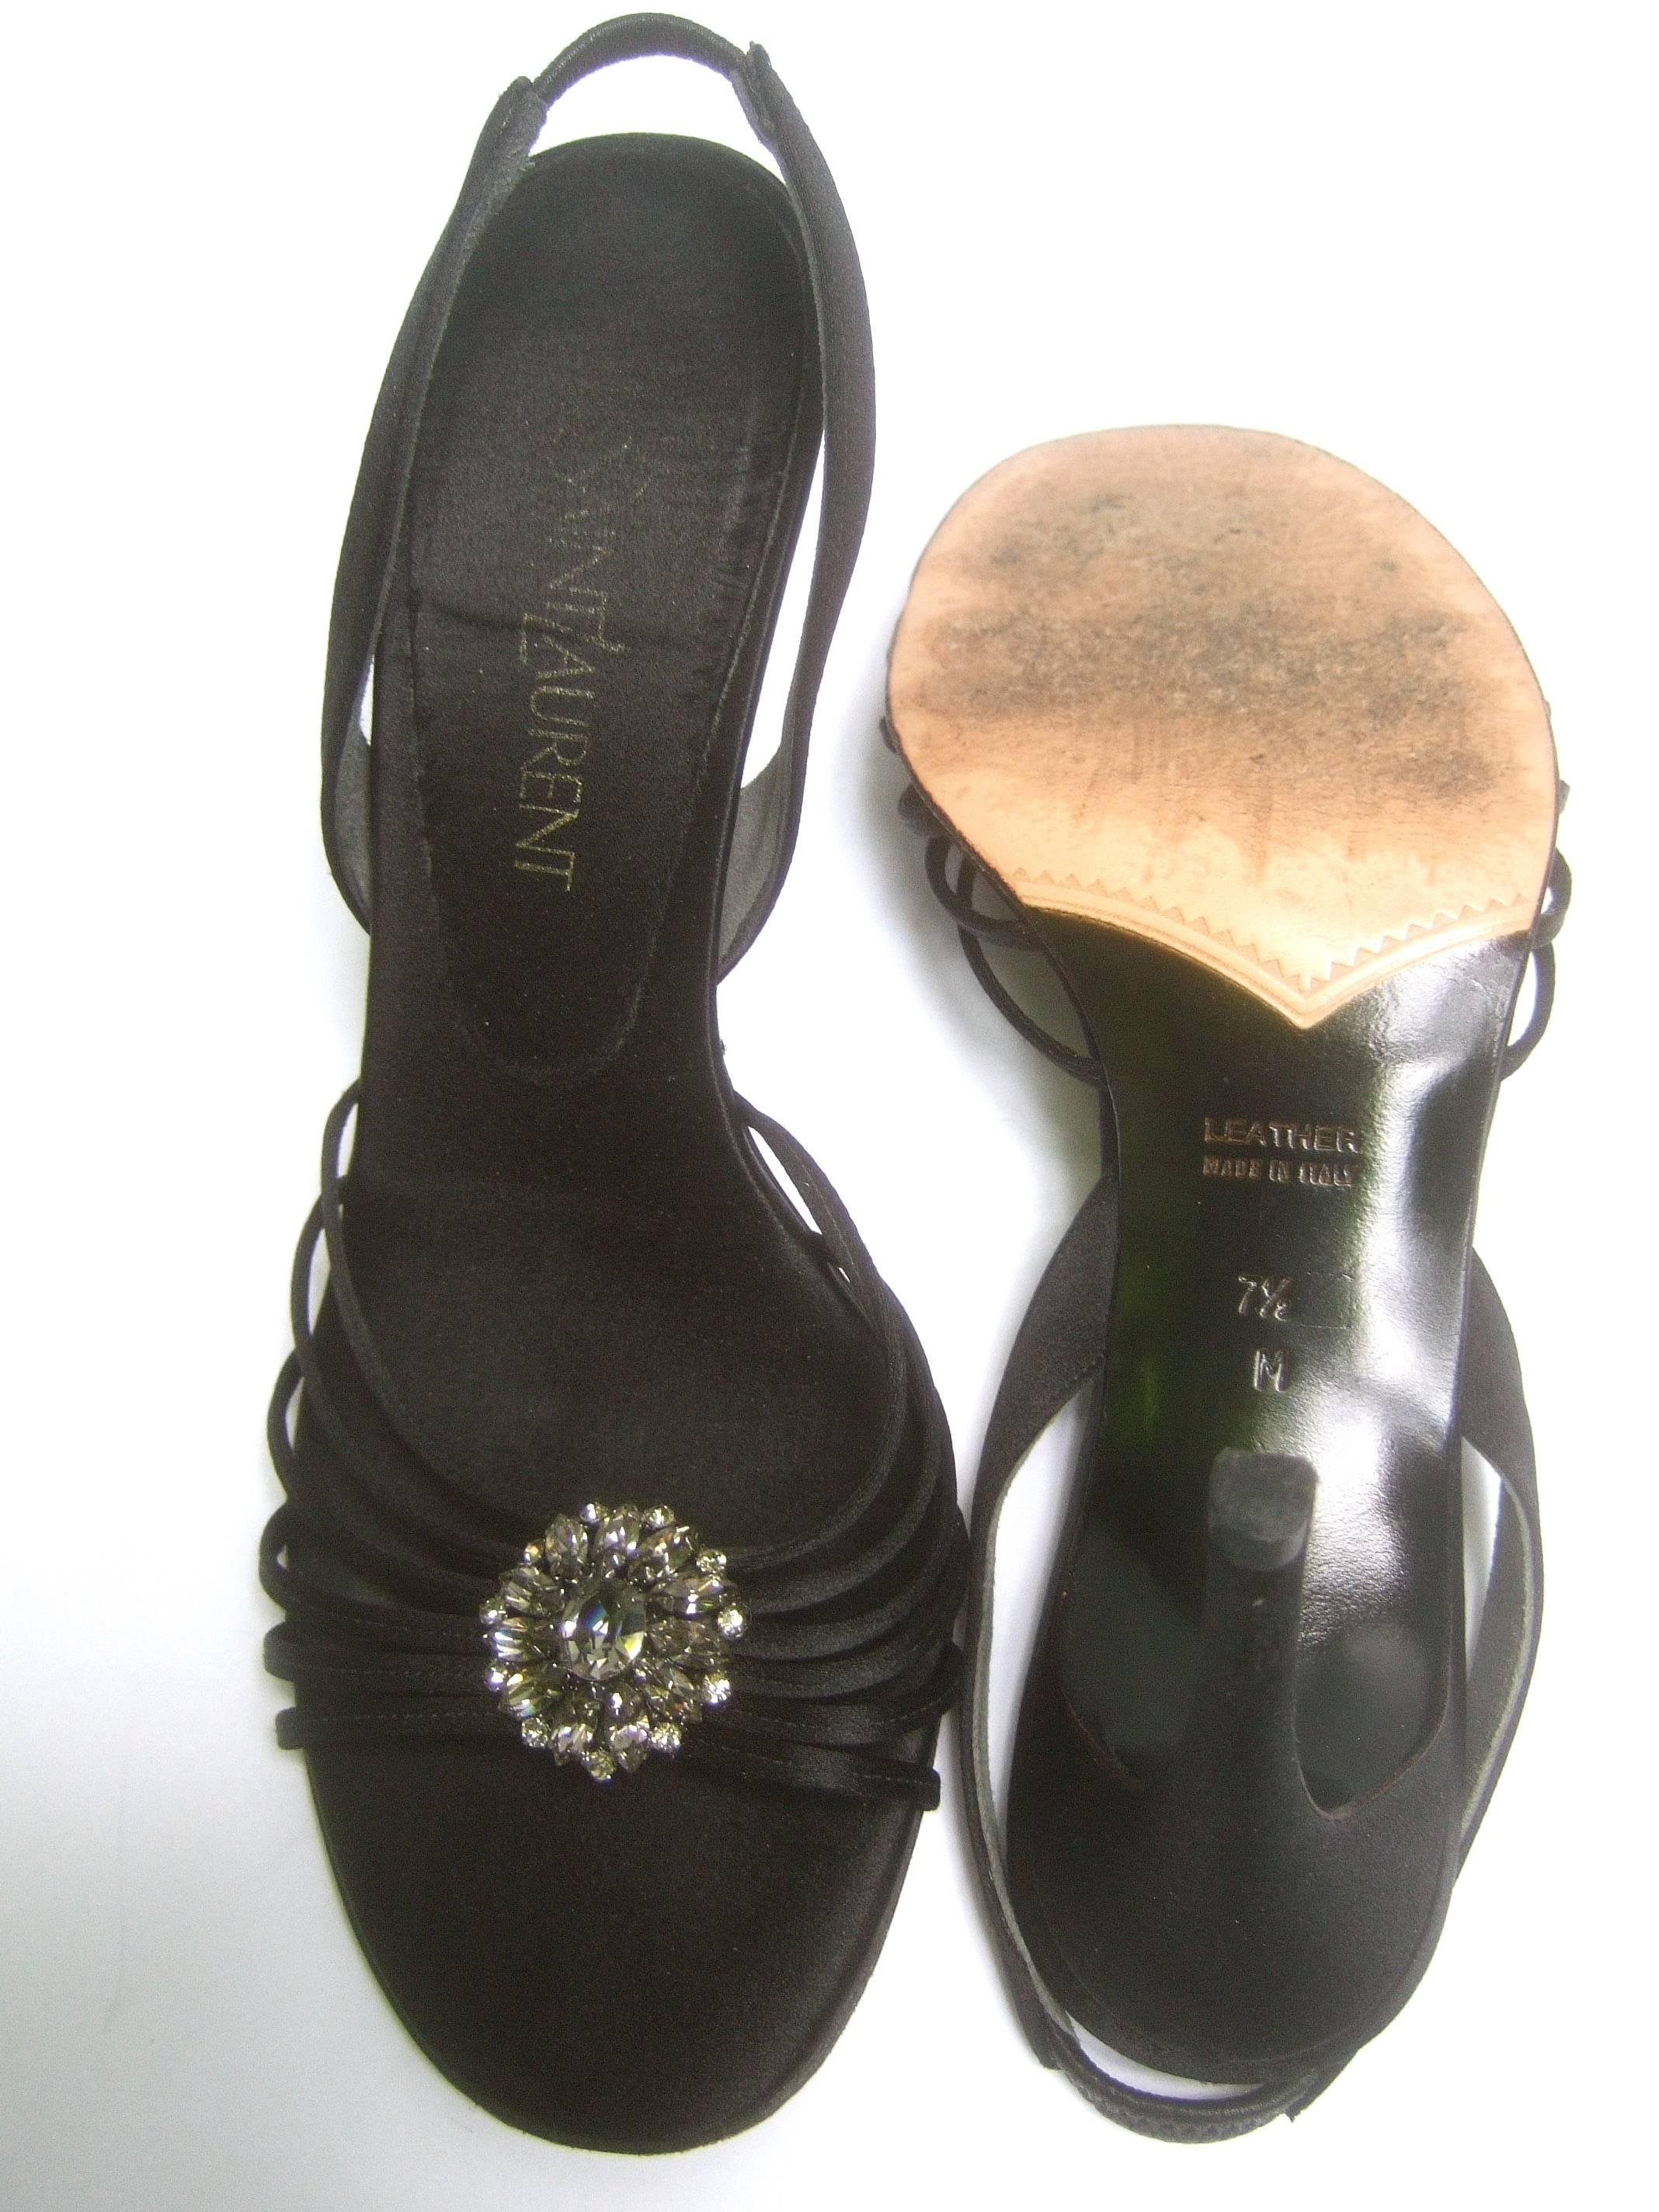 Yves Saint Laurent Black Crystal Satin Pumps in YSL Box Size 7.5 M For Sale 3